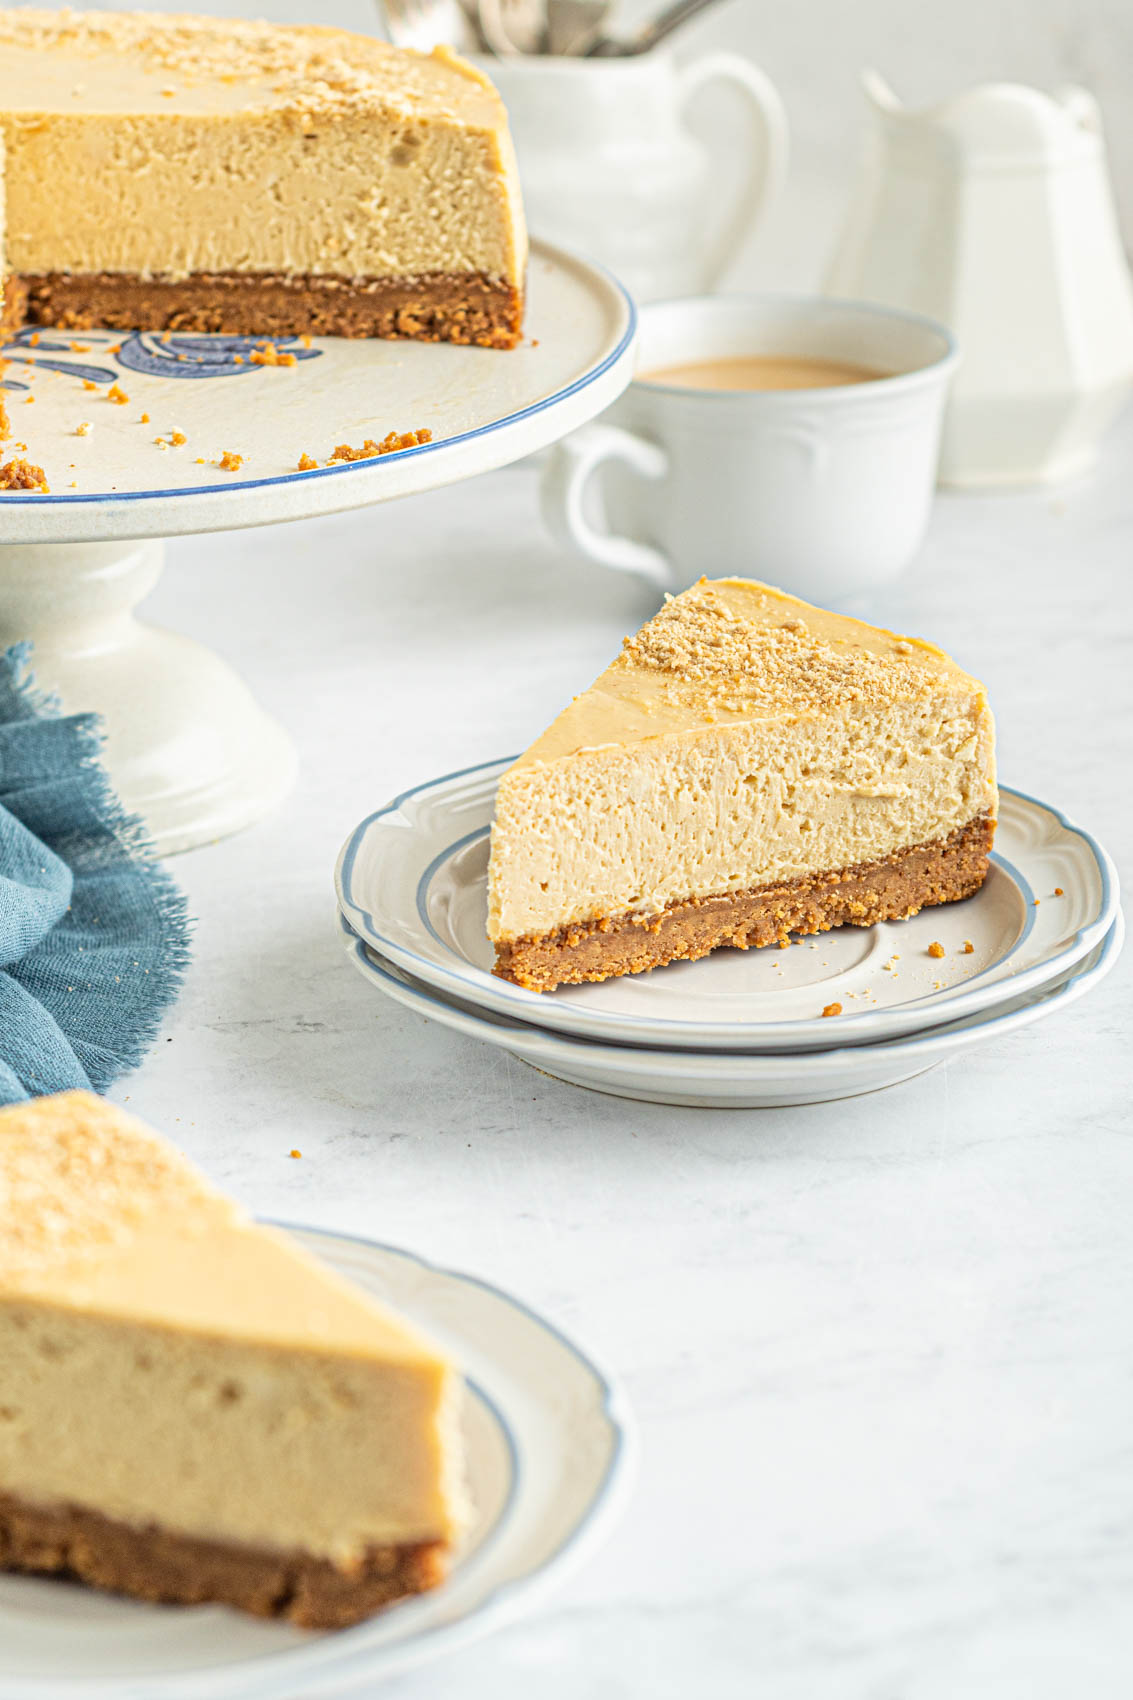 a slice of peanut butter cheesecake next to a blue napkin and a cup of coffee